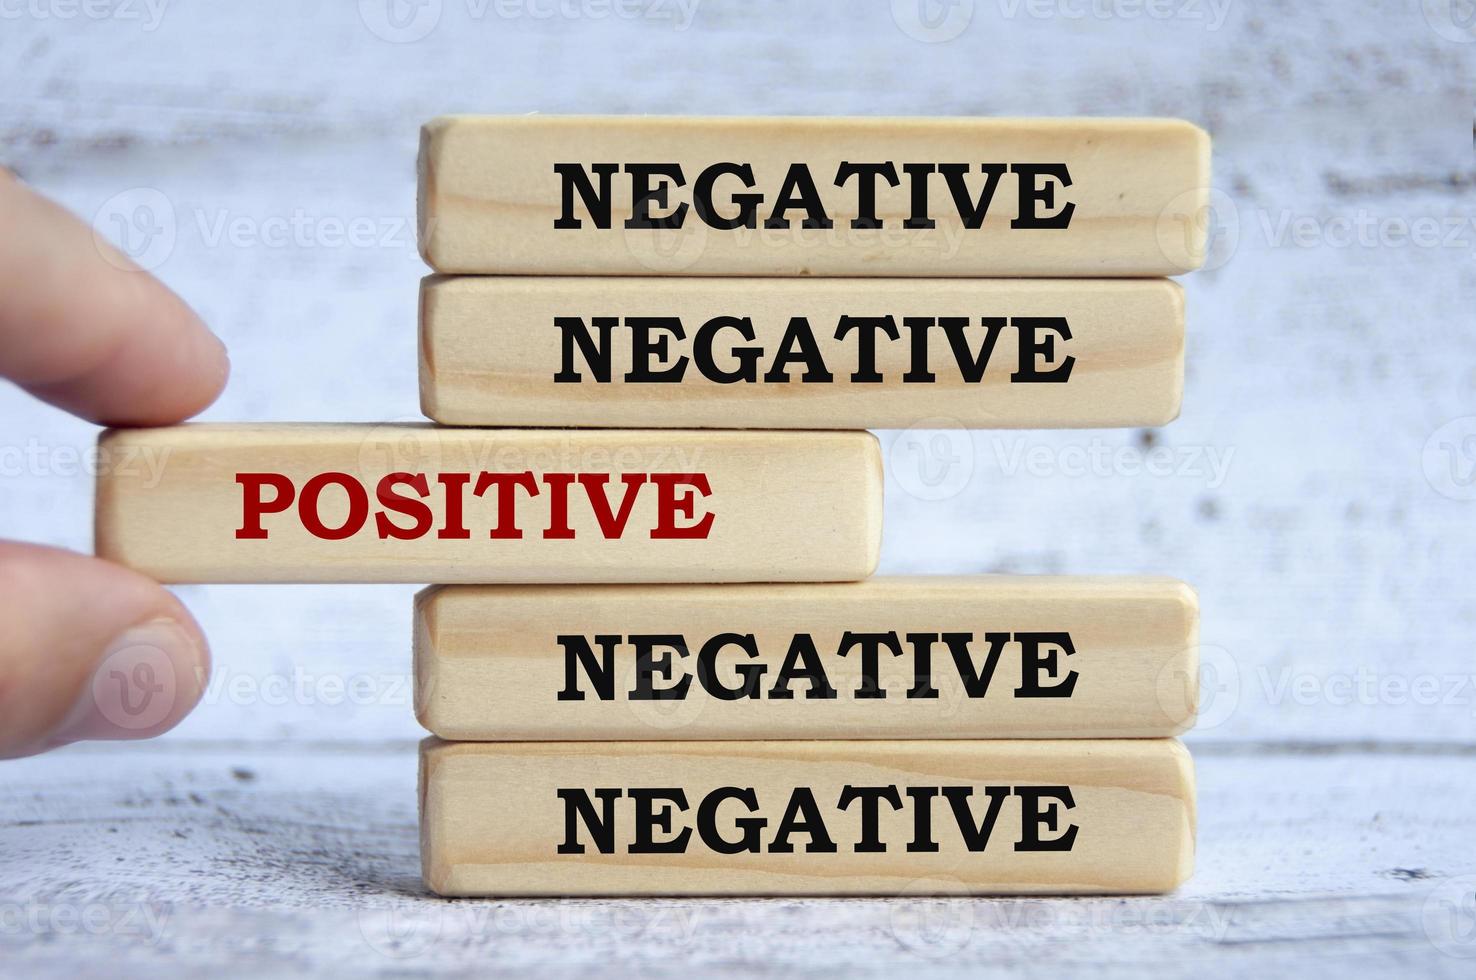 Negative and positive text on wooden blocks with hand placing a wooden block in the middle. photo